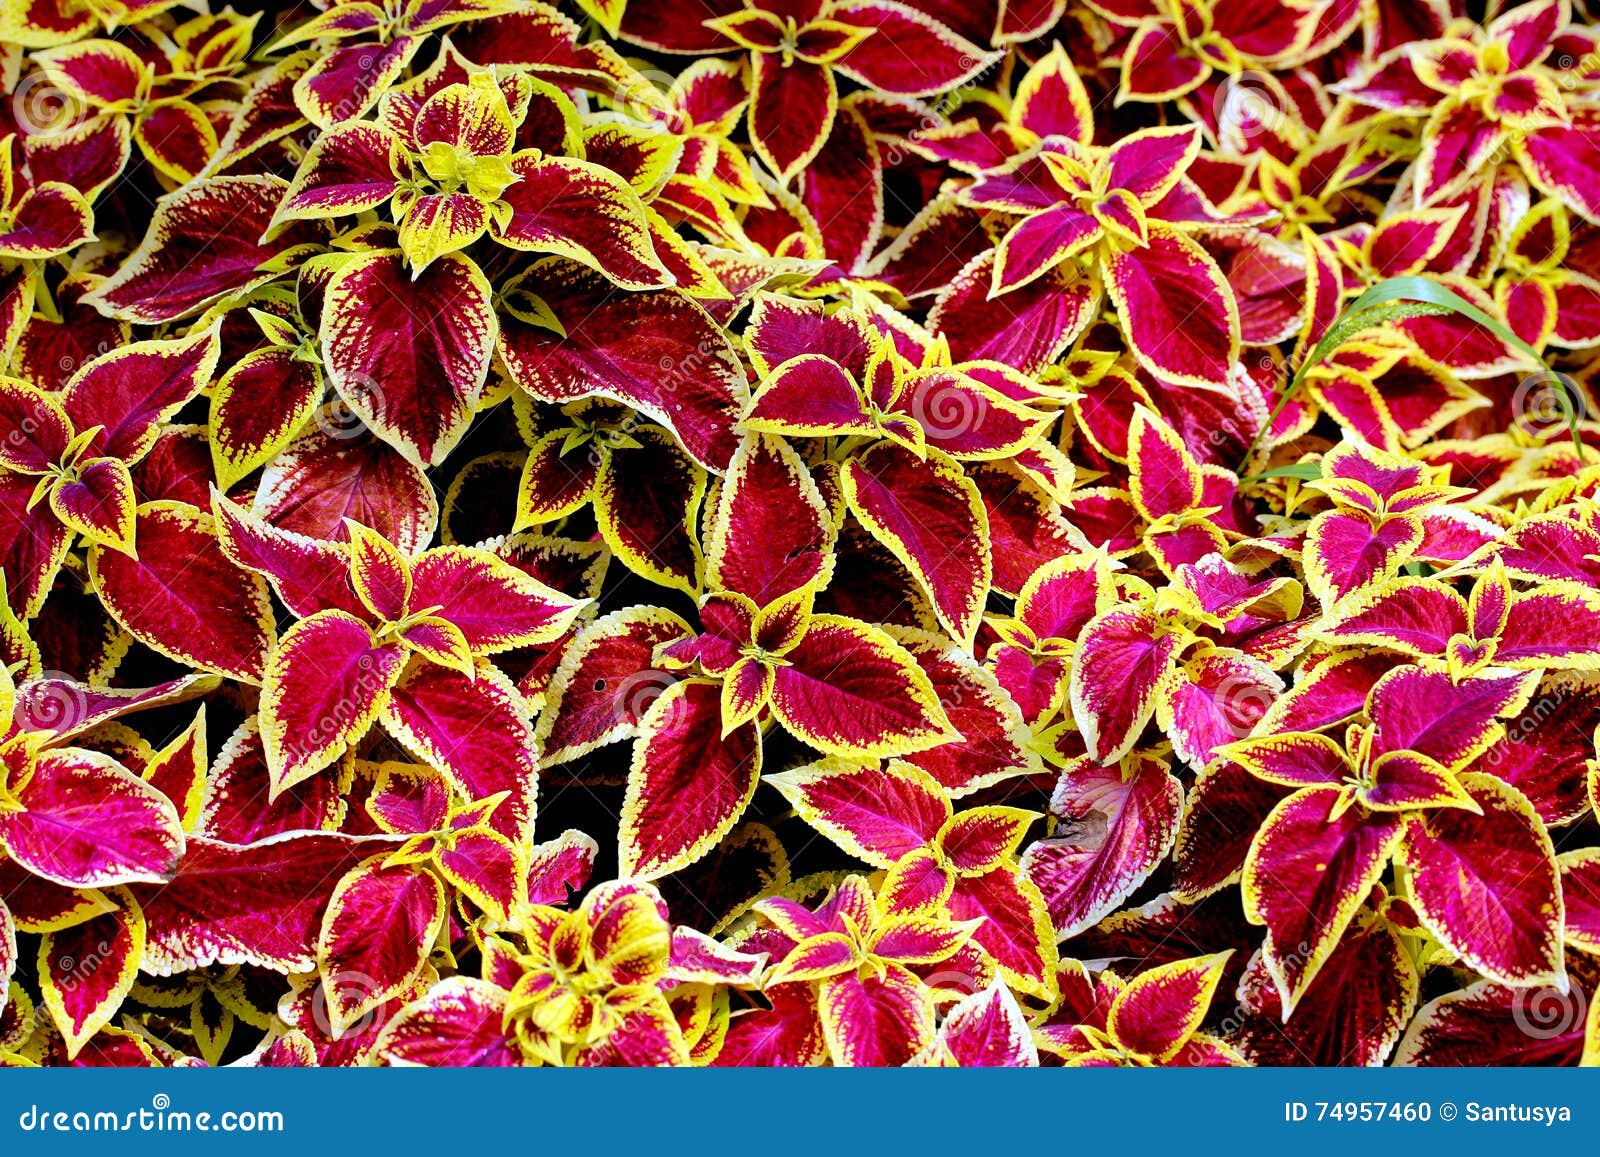 Rex begonia flowers stock photo. Image of bright, color - 74957460